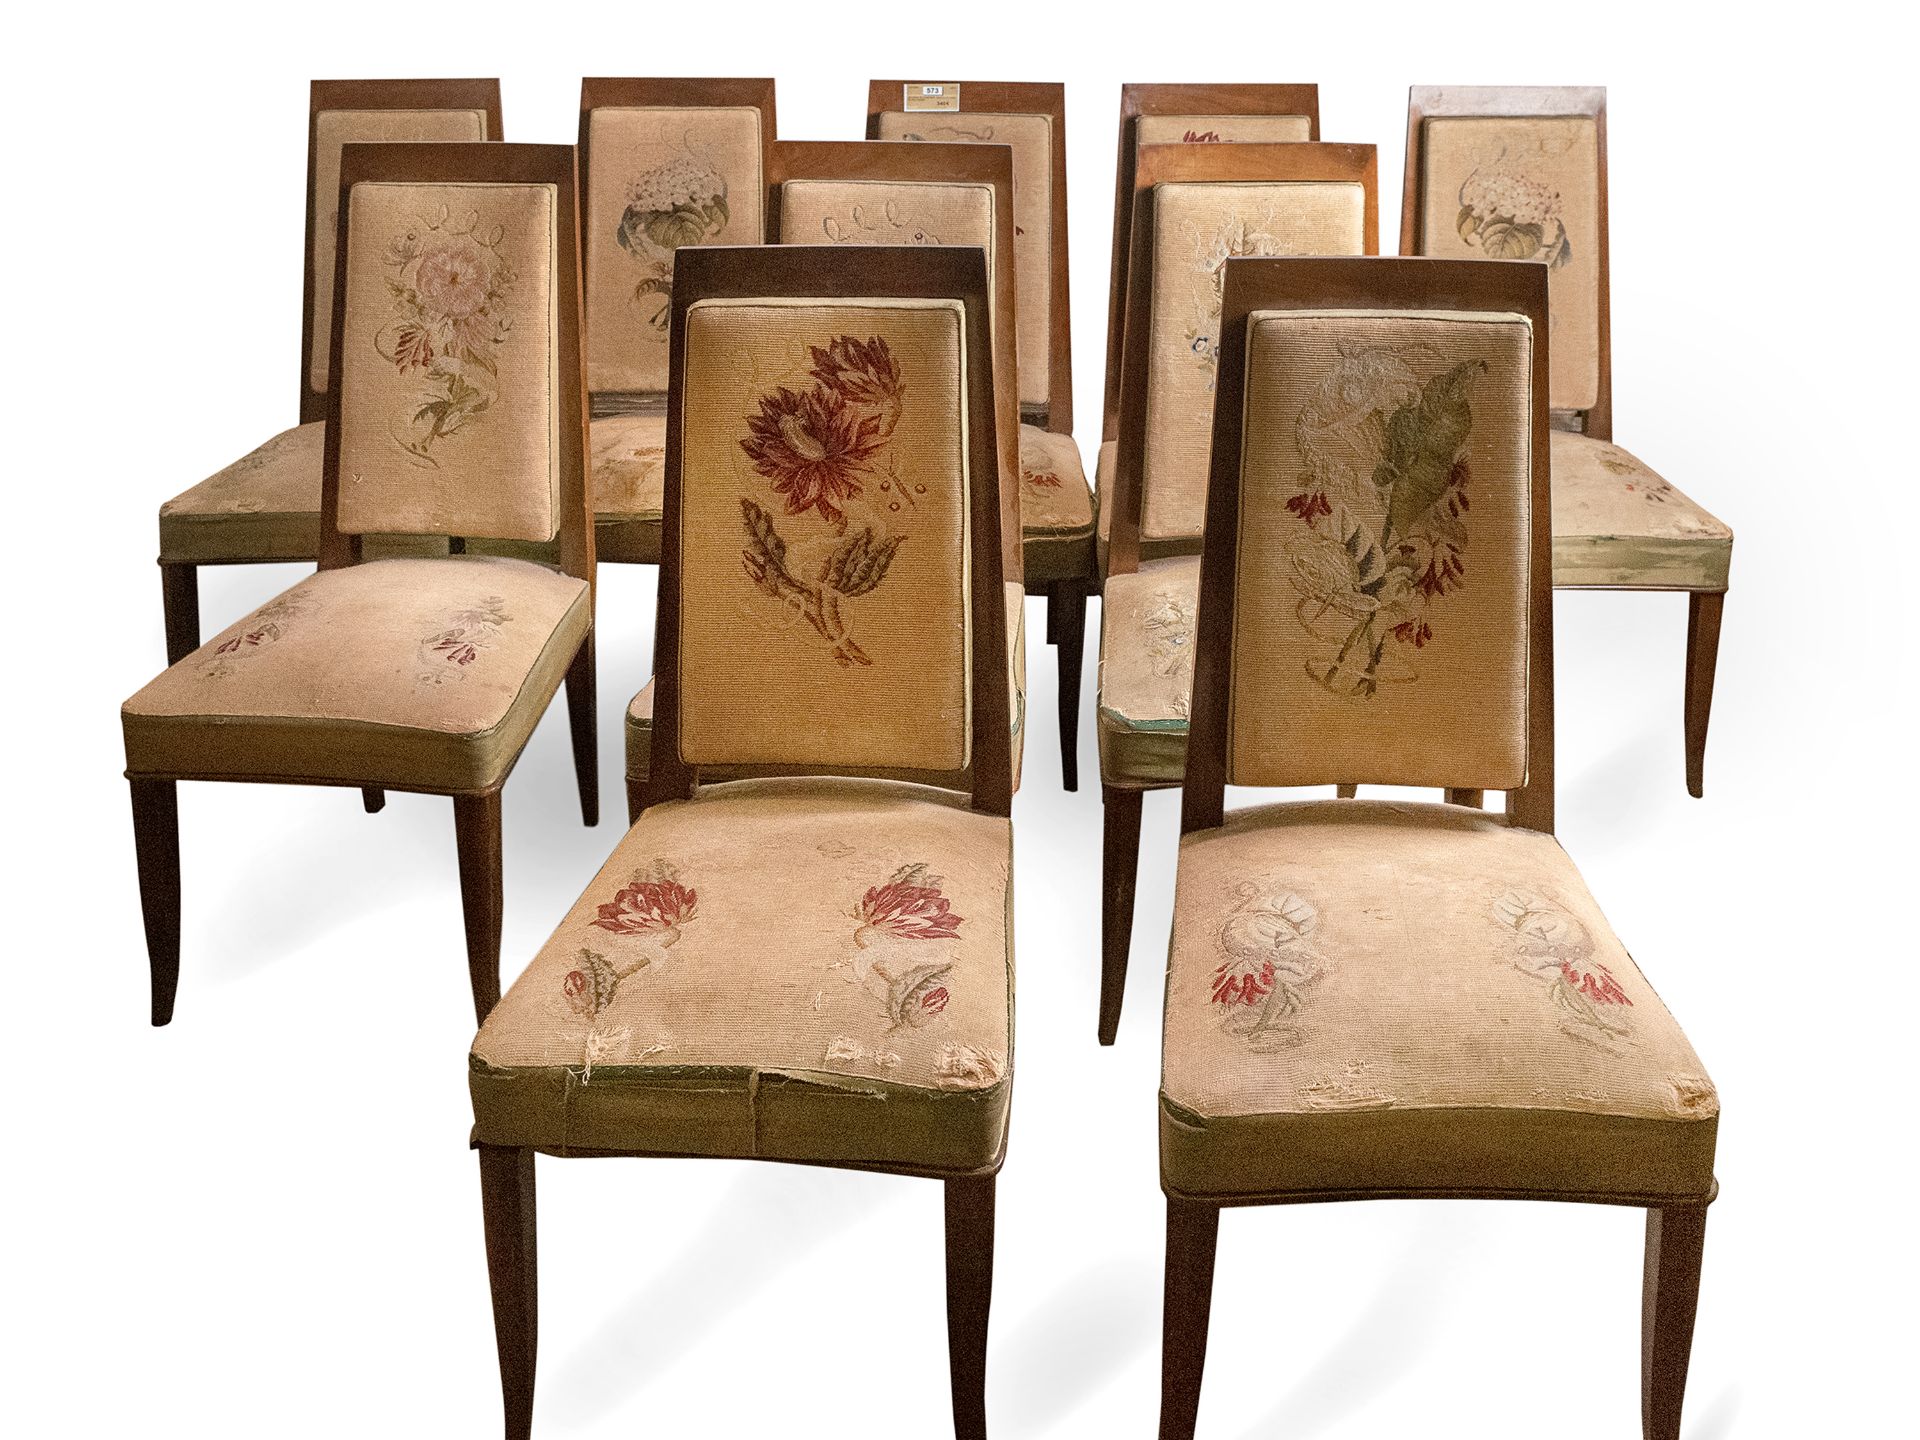 A set of ten Italian chairs with petit point upholstery - Image 4 of 5